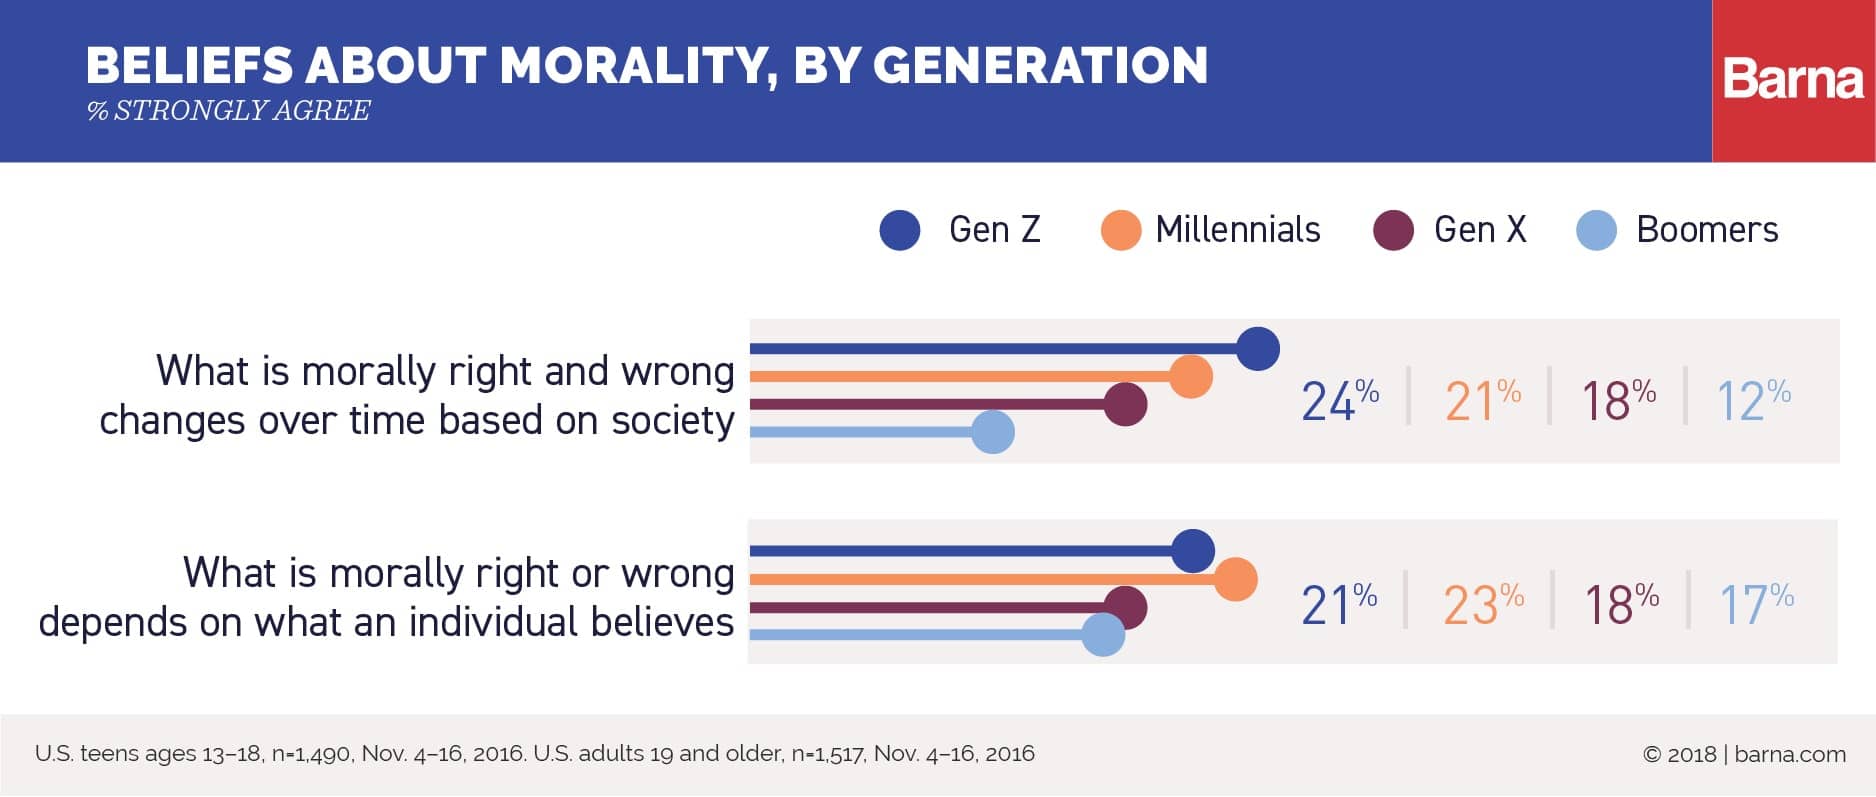 Beliefs About Morality, by Generation from Barna Group